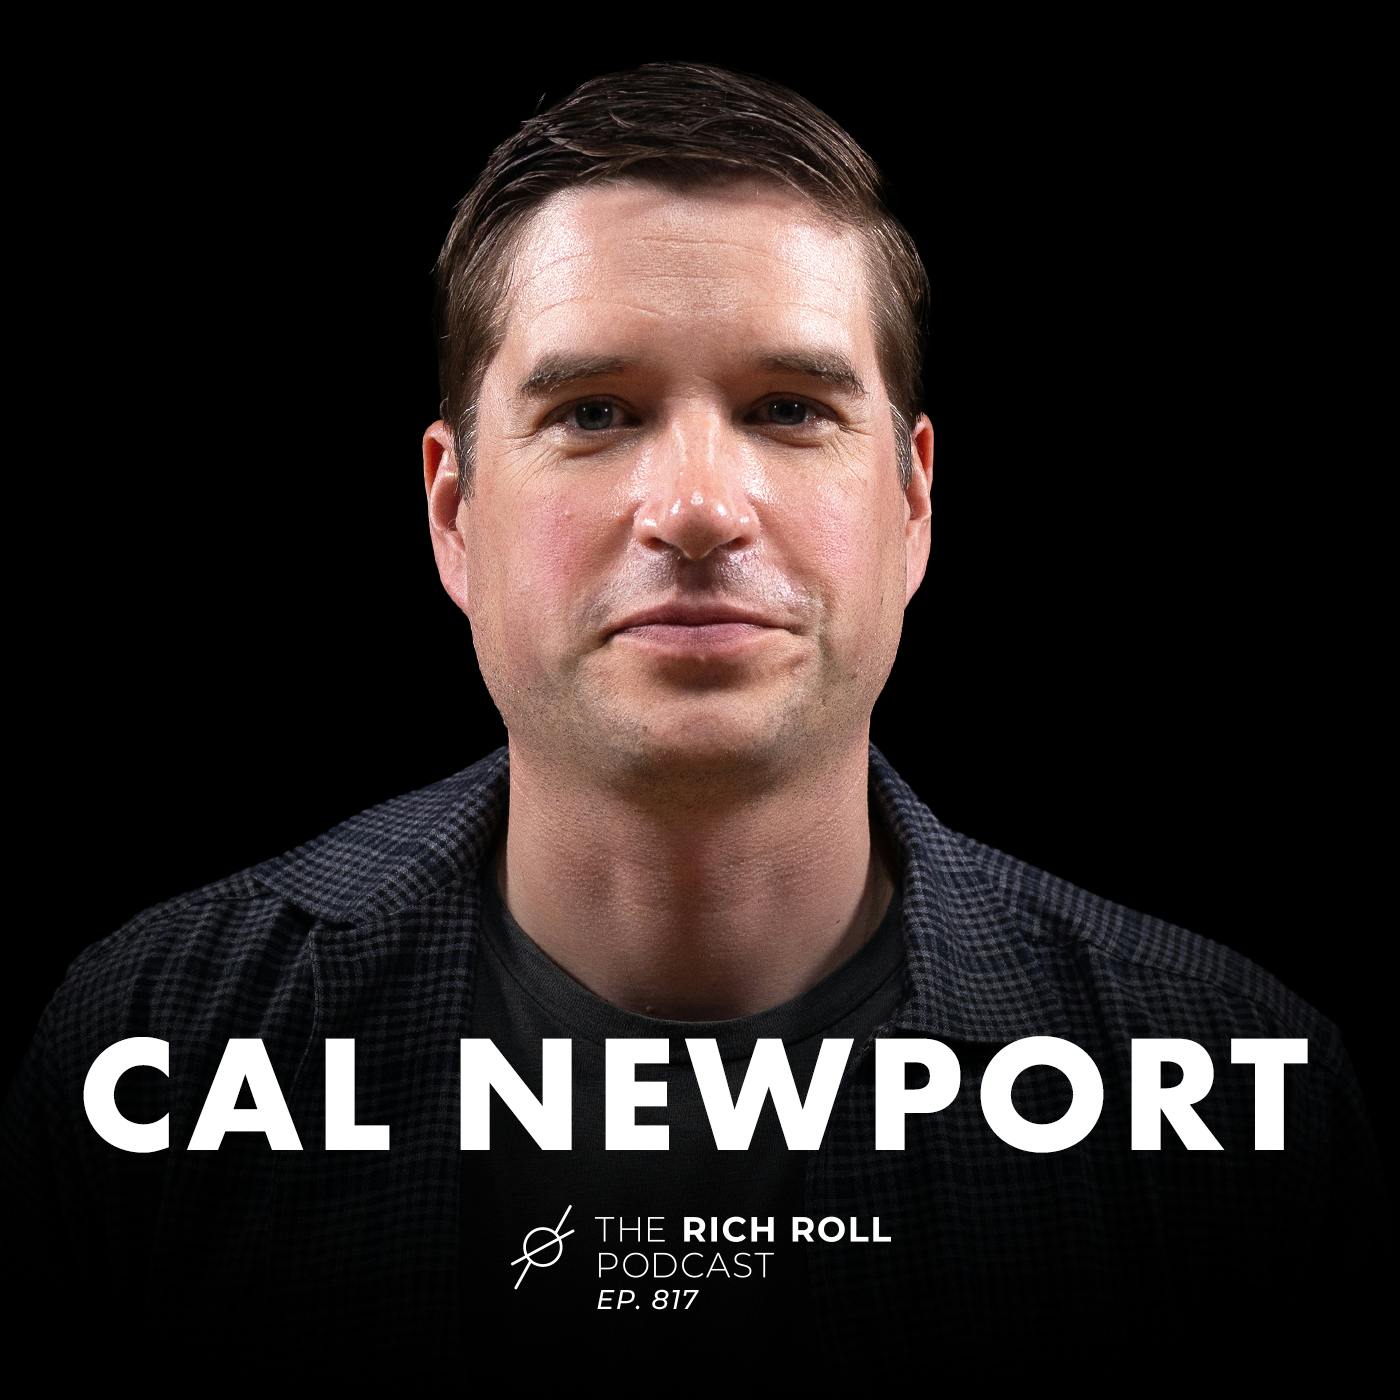 Slow Productivity: Cal Newport On How To Escape Burnout, Do Your Best Work & Achieve More By Doing Less